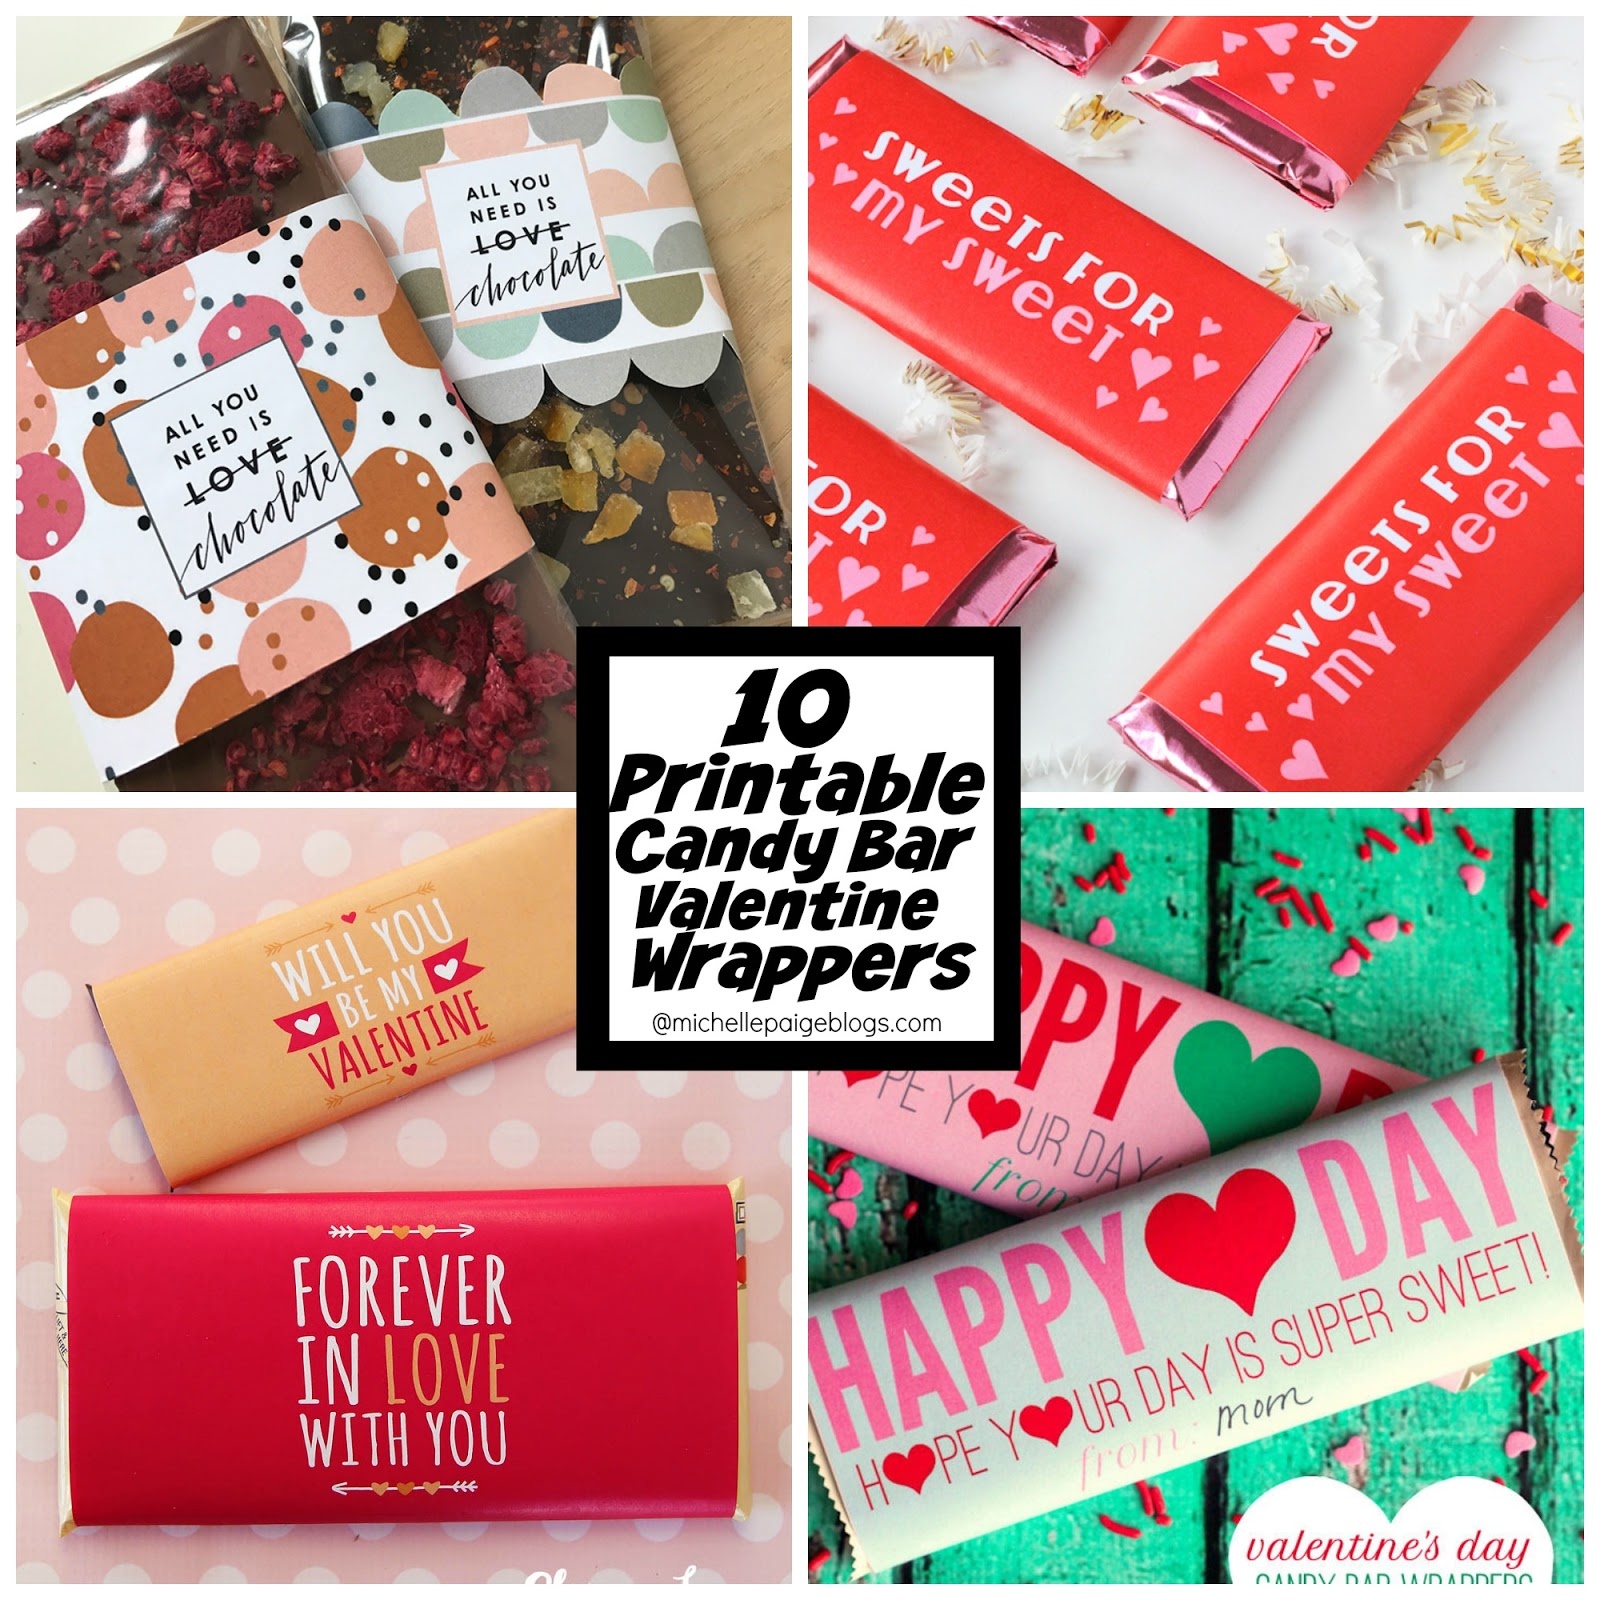 Michelle Paige Blogs: 10 Free Printable Candy Bar Wrapper Valentines - Free Printable Candy Bar Wrappers